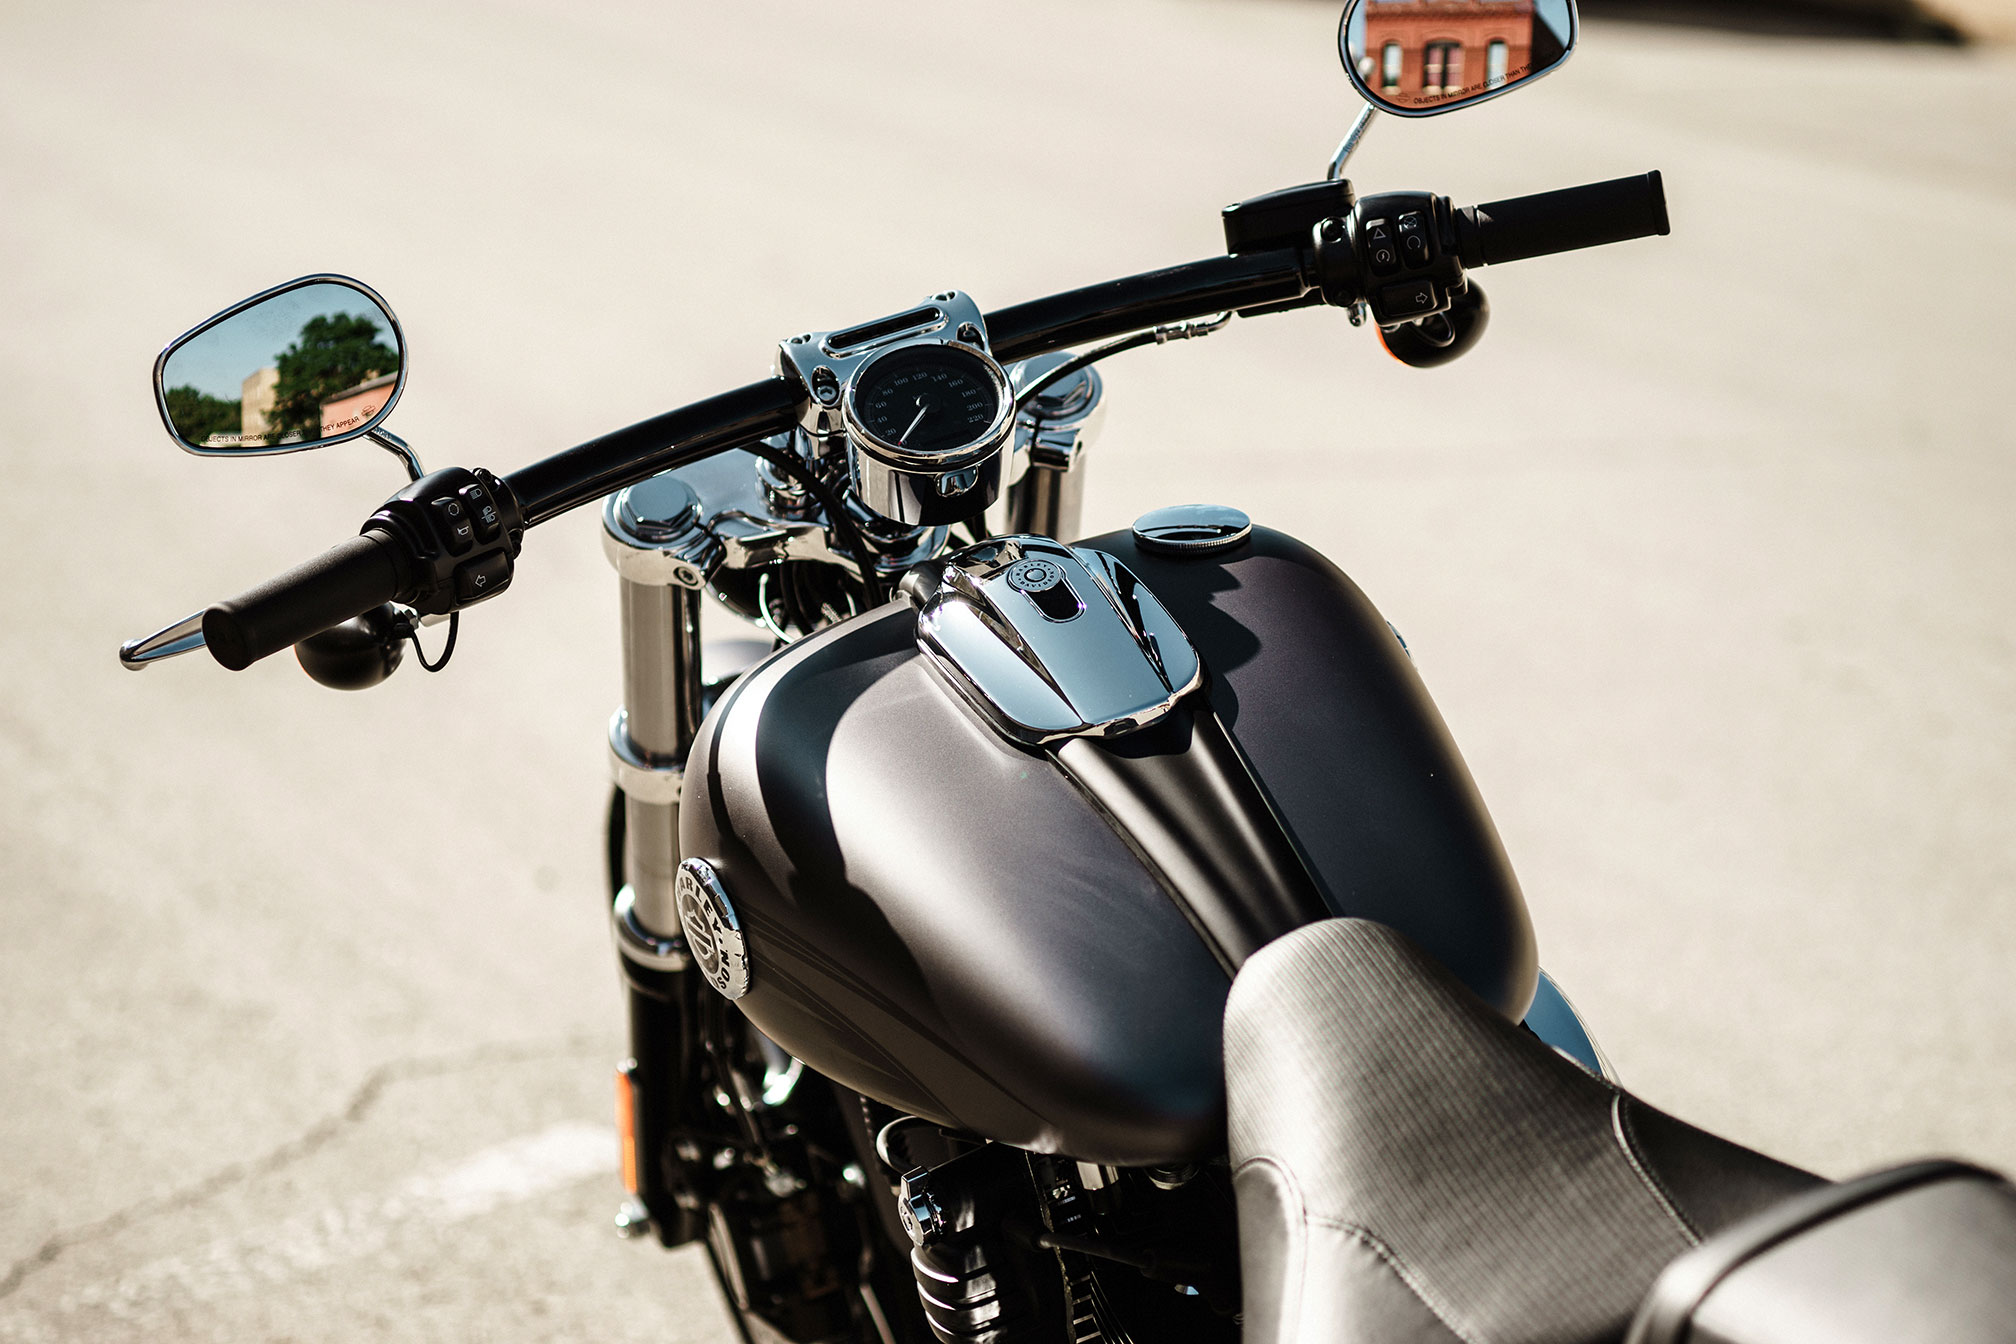 2016 Harley Davidson Softail Breakout Review